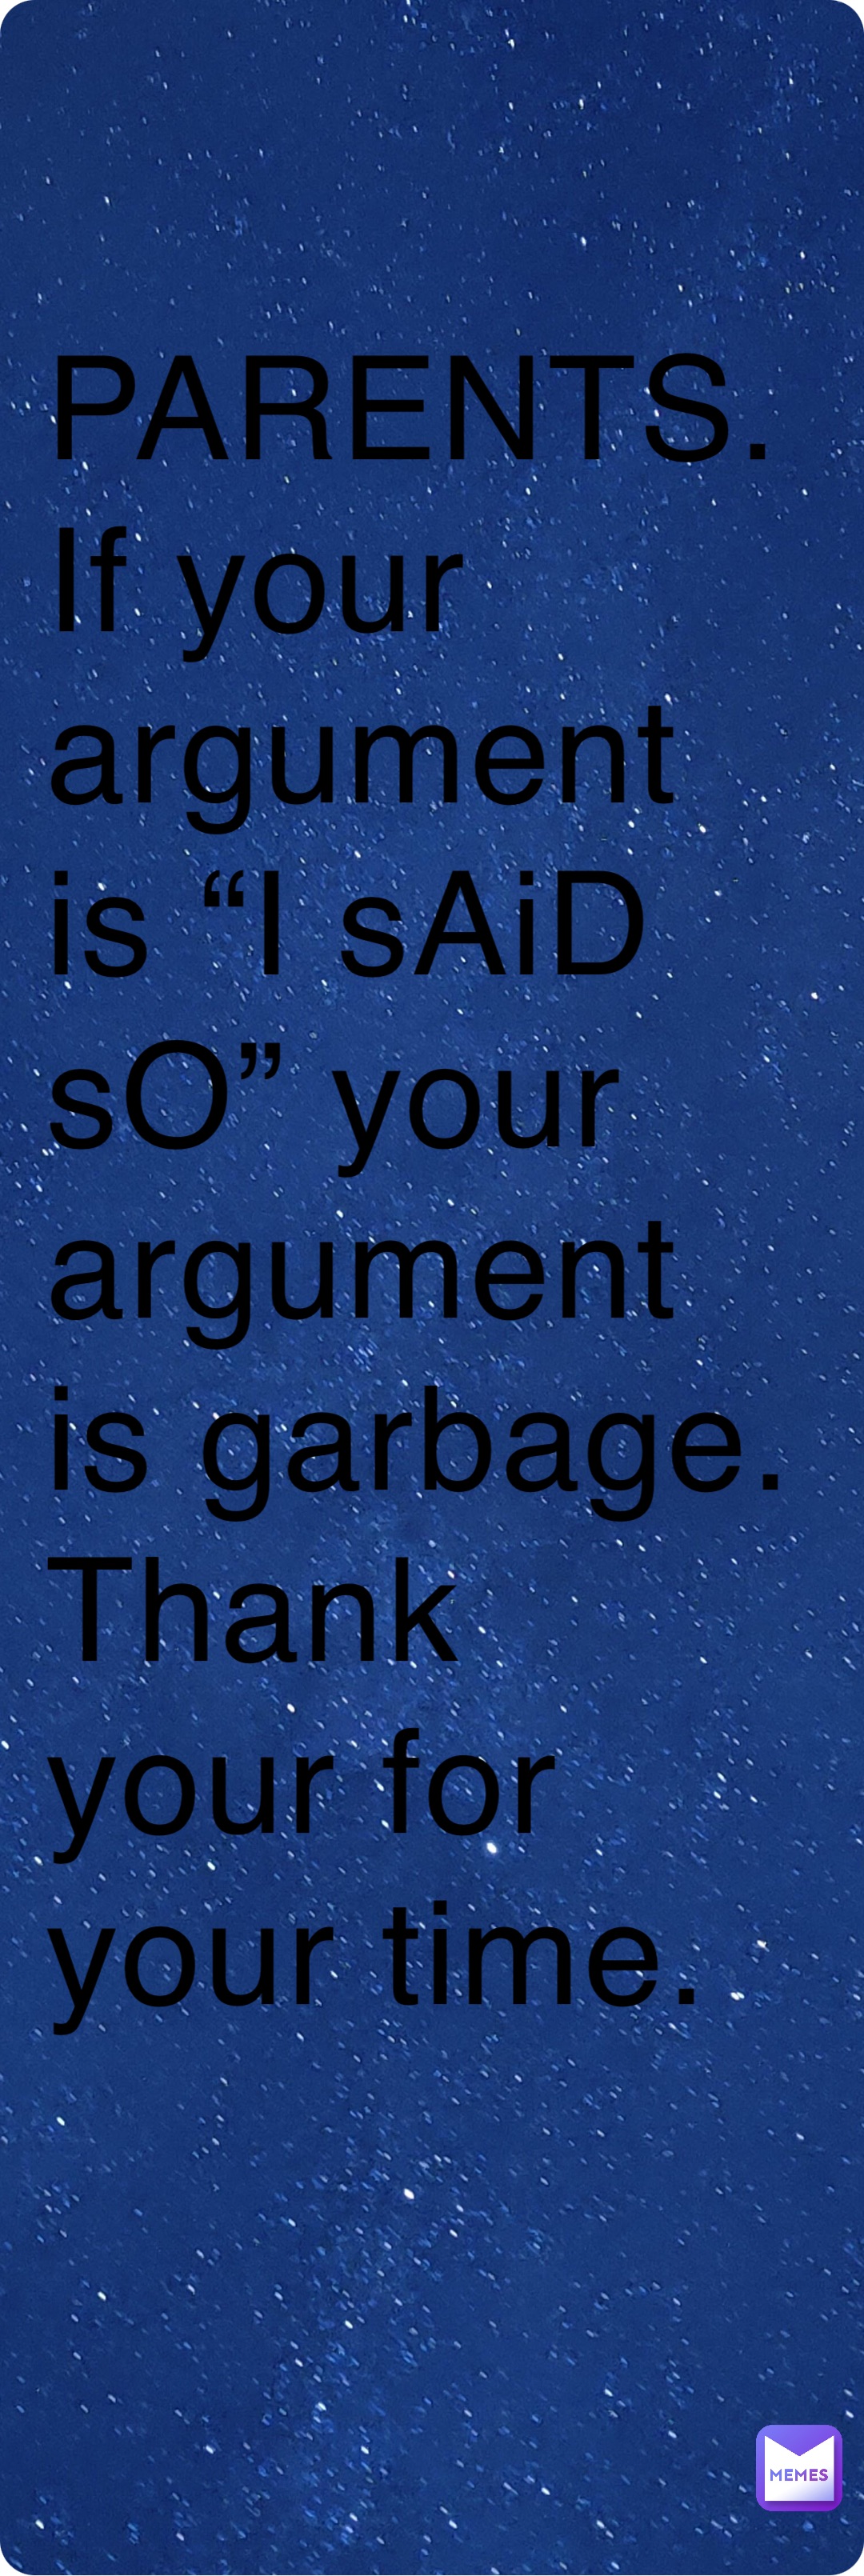 PARENTS. 
If your argument is “I sAiD sO” your argument is garbage.
Thank your for your time.